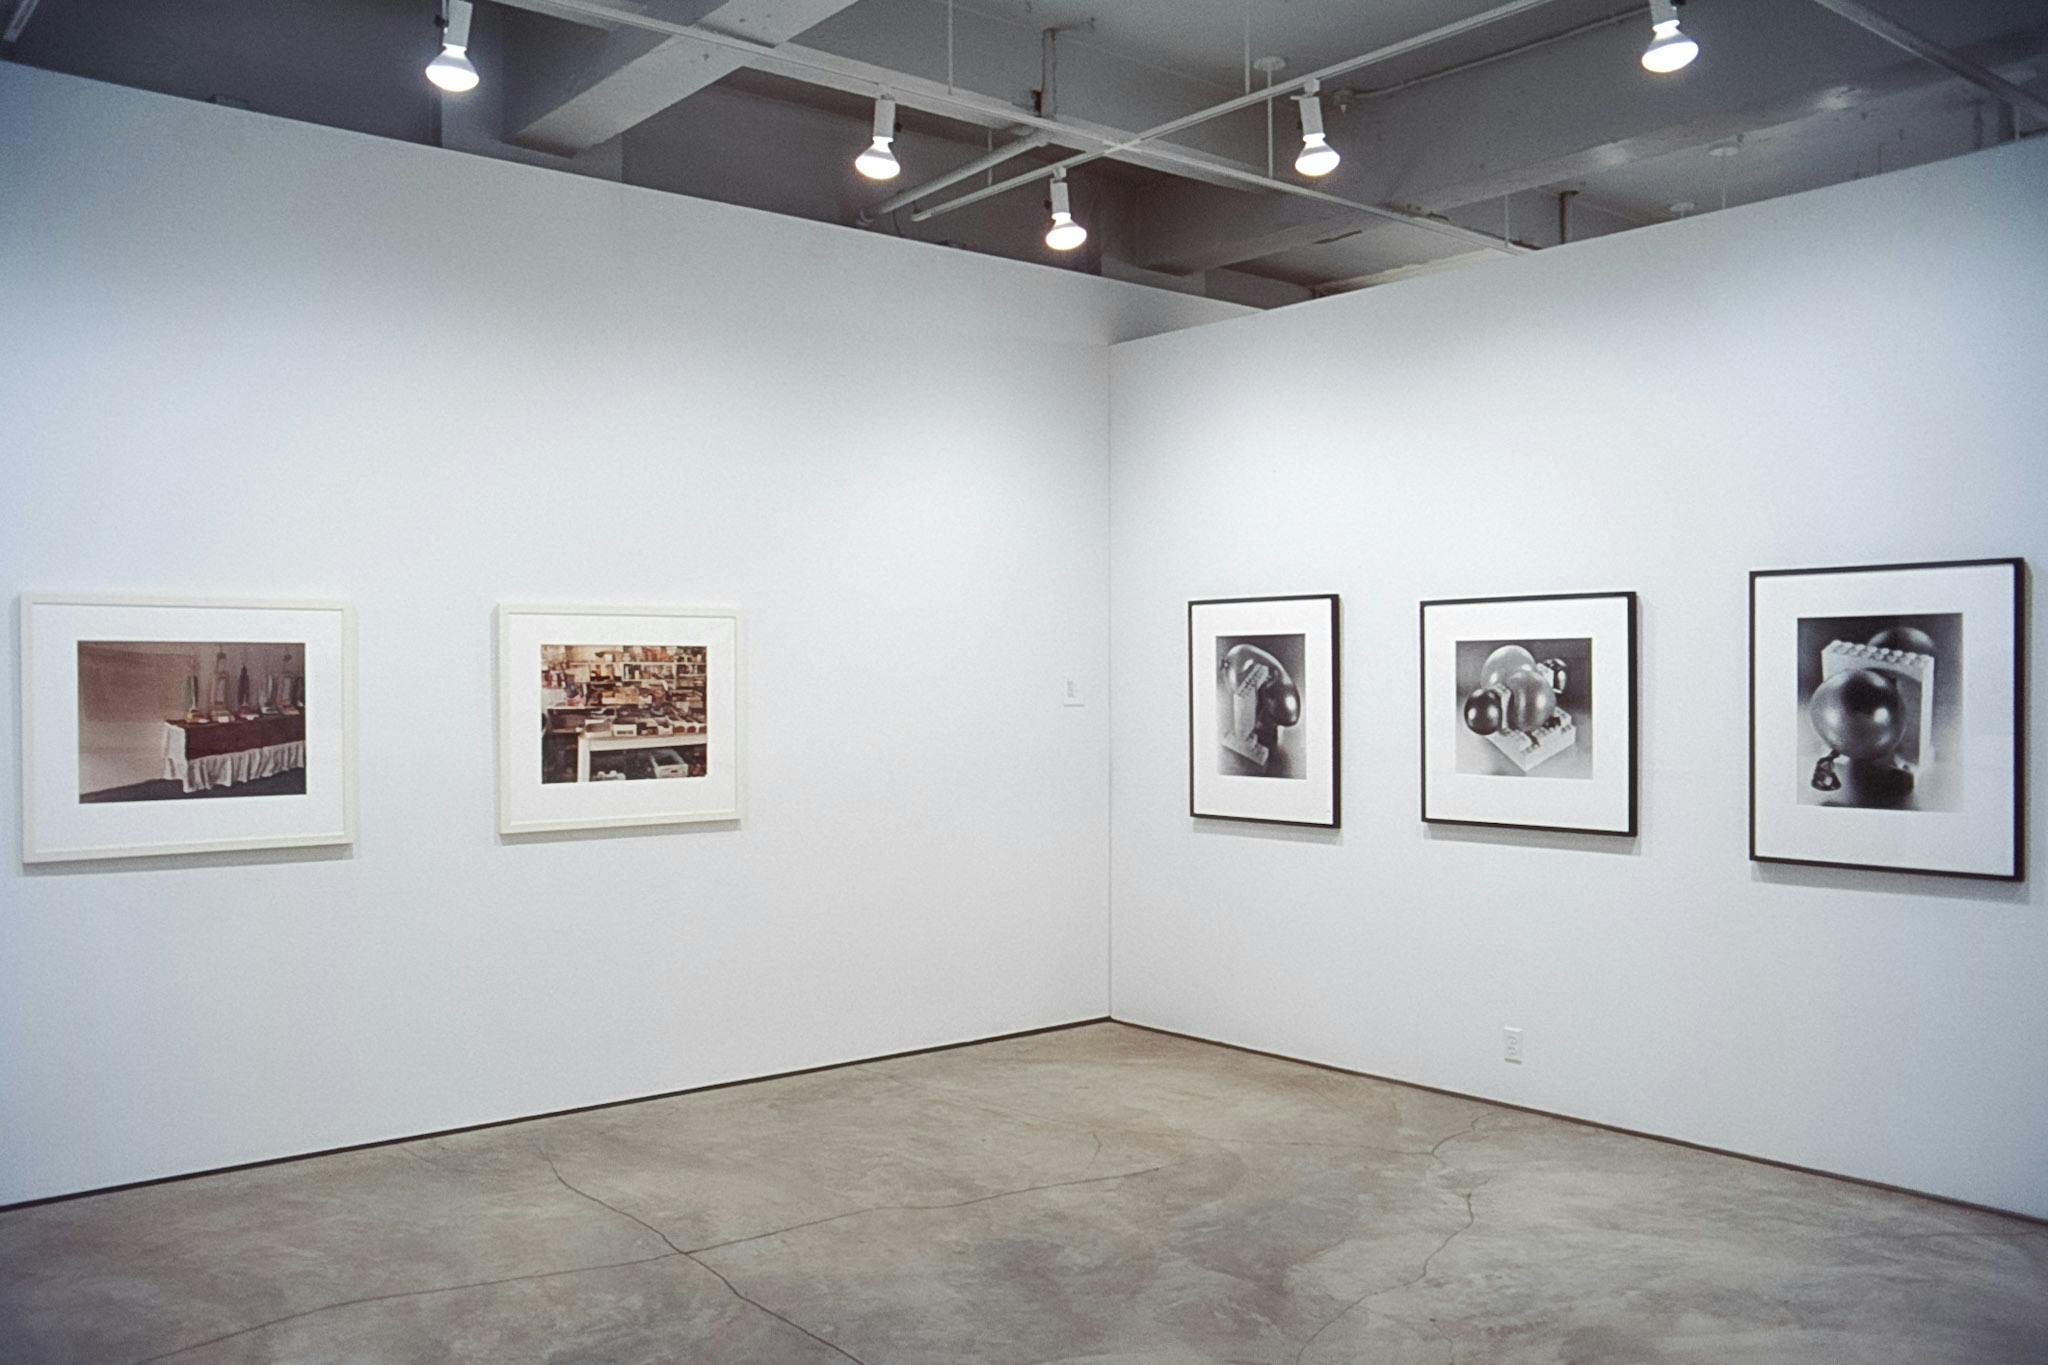 Five photo pieces are installed on the gallery walls. Three black and white photographs on the right depict silver organic shapes and white blocks. Two on the left are photos taken inside buildings. 